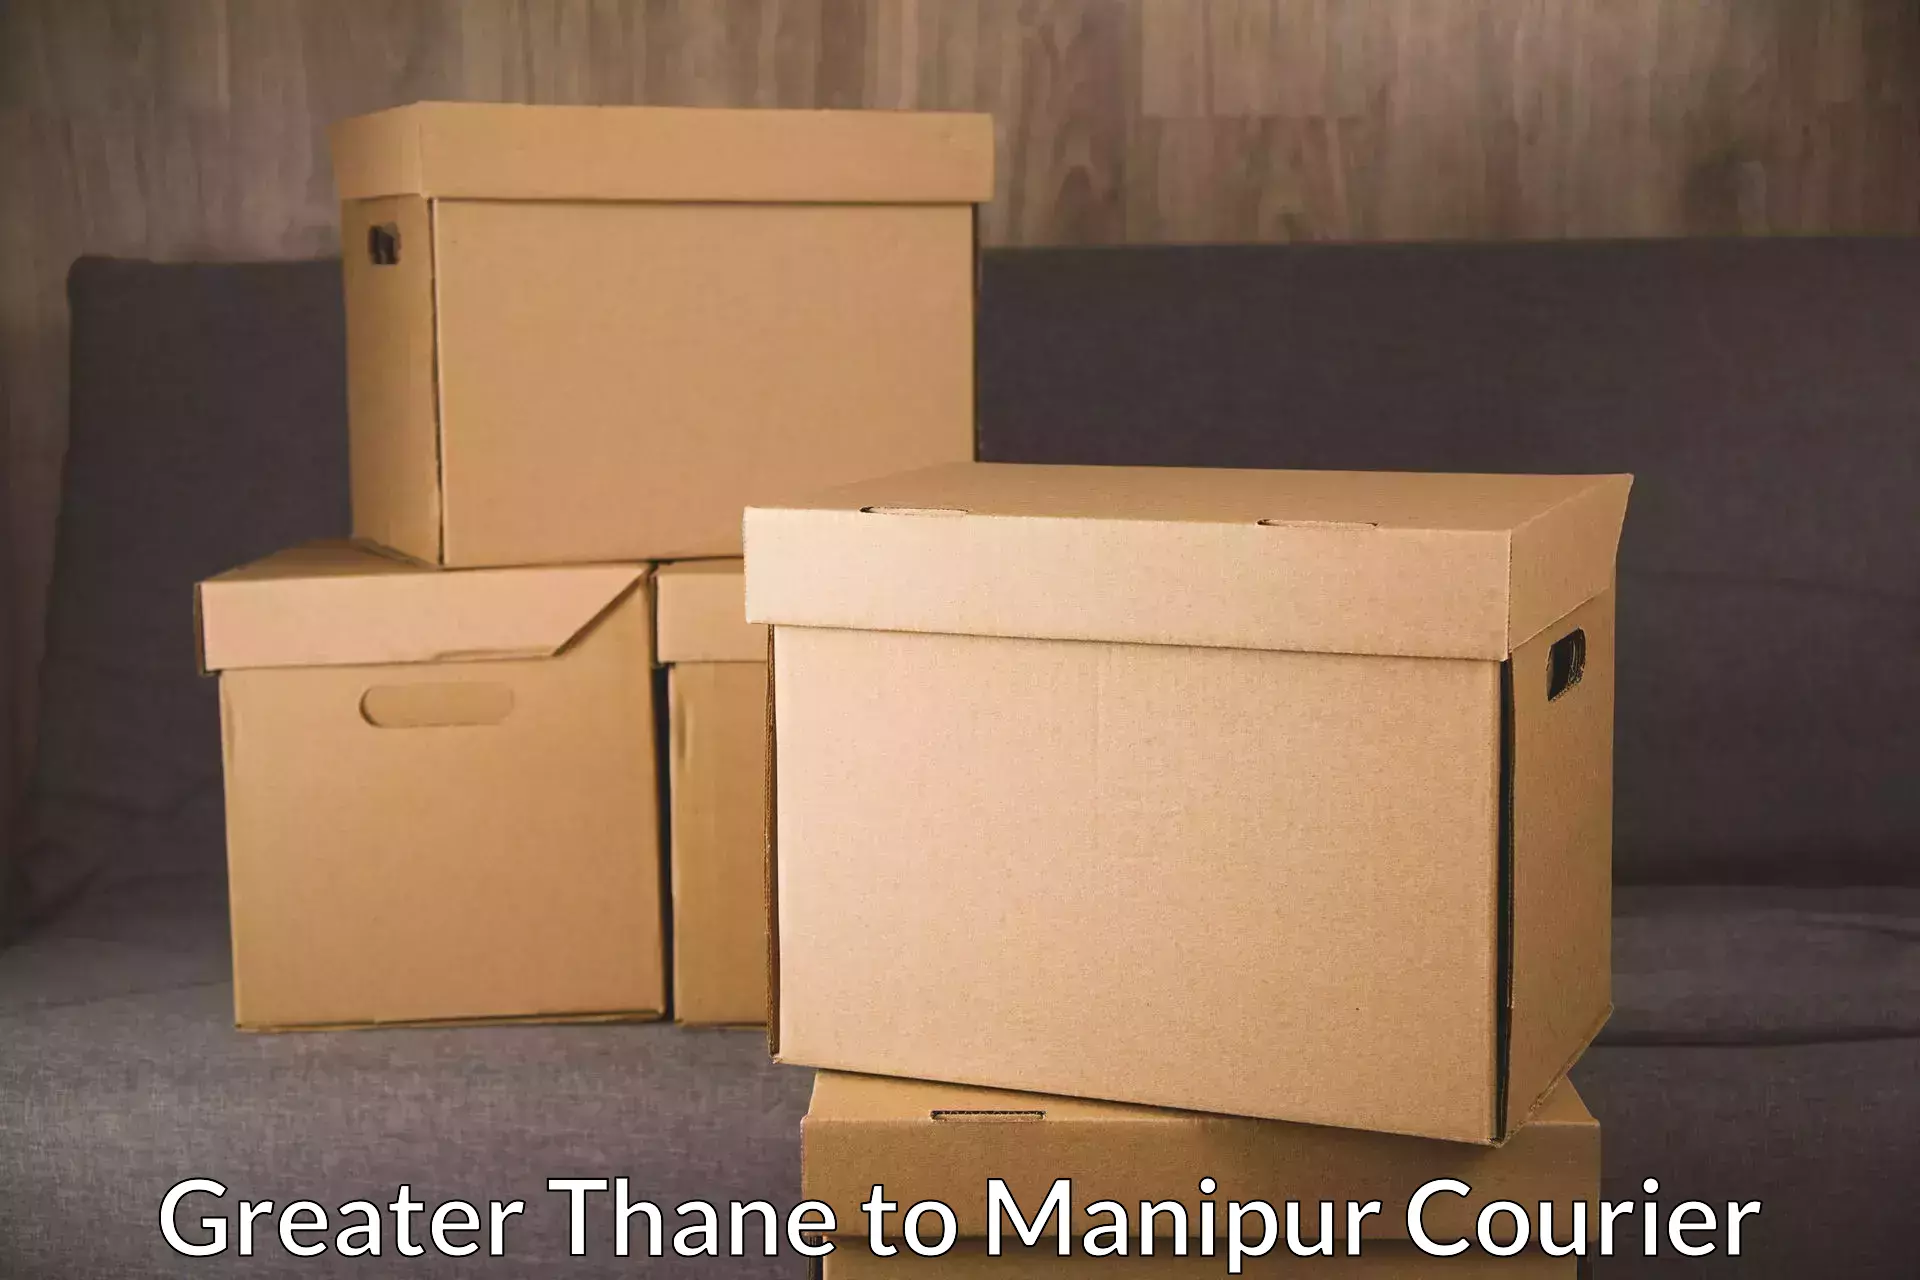 Urgent courier needs Greater Thane to Manipur